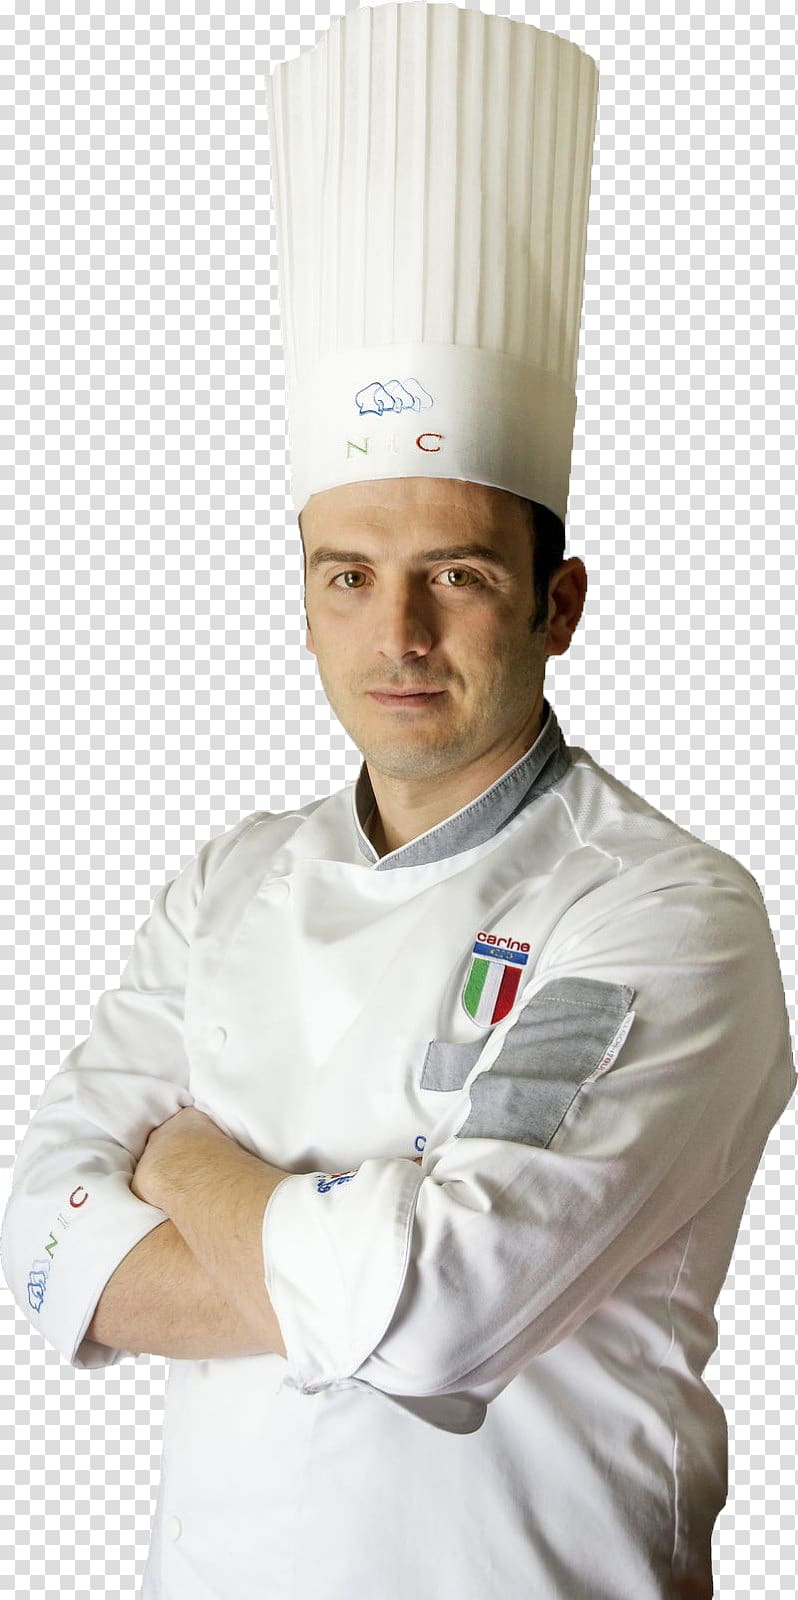 Chef Grand Hotel Villa Igiea, MGallery by Sofitel Restaurant Palace, hotel transparent background PNG clipart